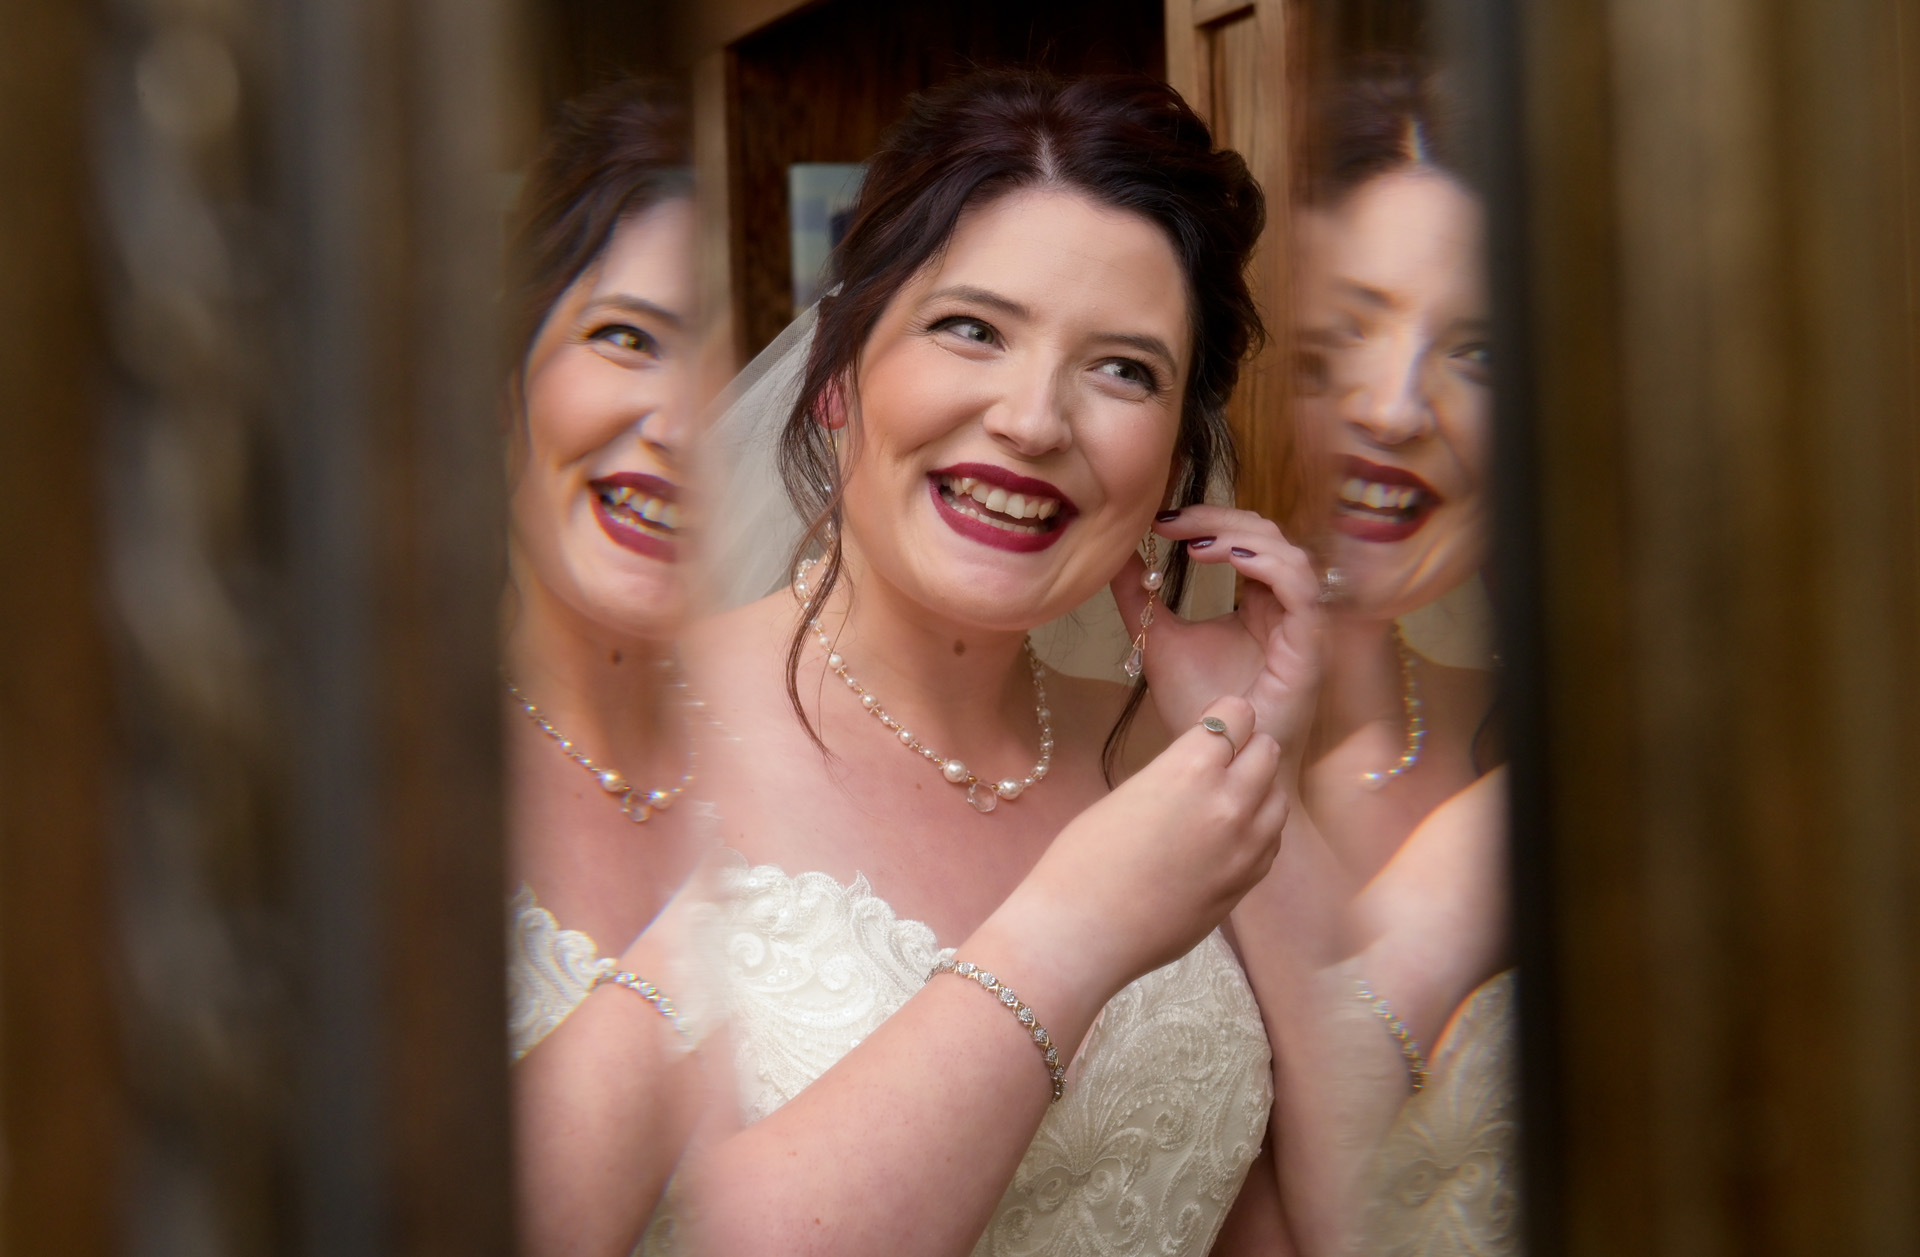 A bride grins while putting in her earrings before her wedding in Livonia, Michigan. I love how she's refracted in the mirror.